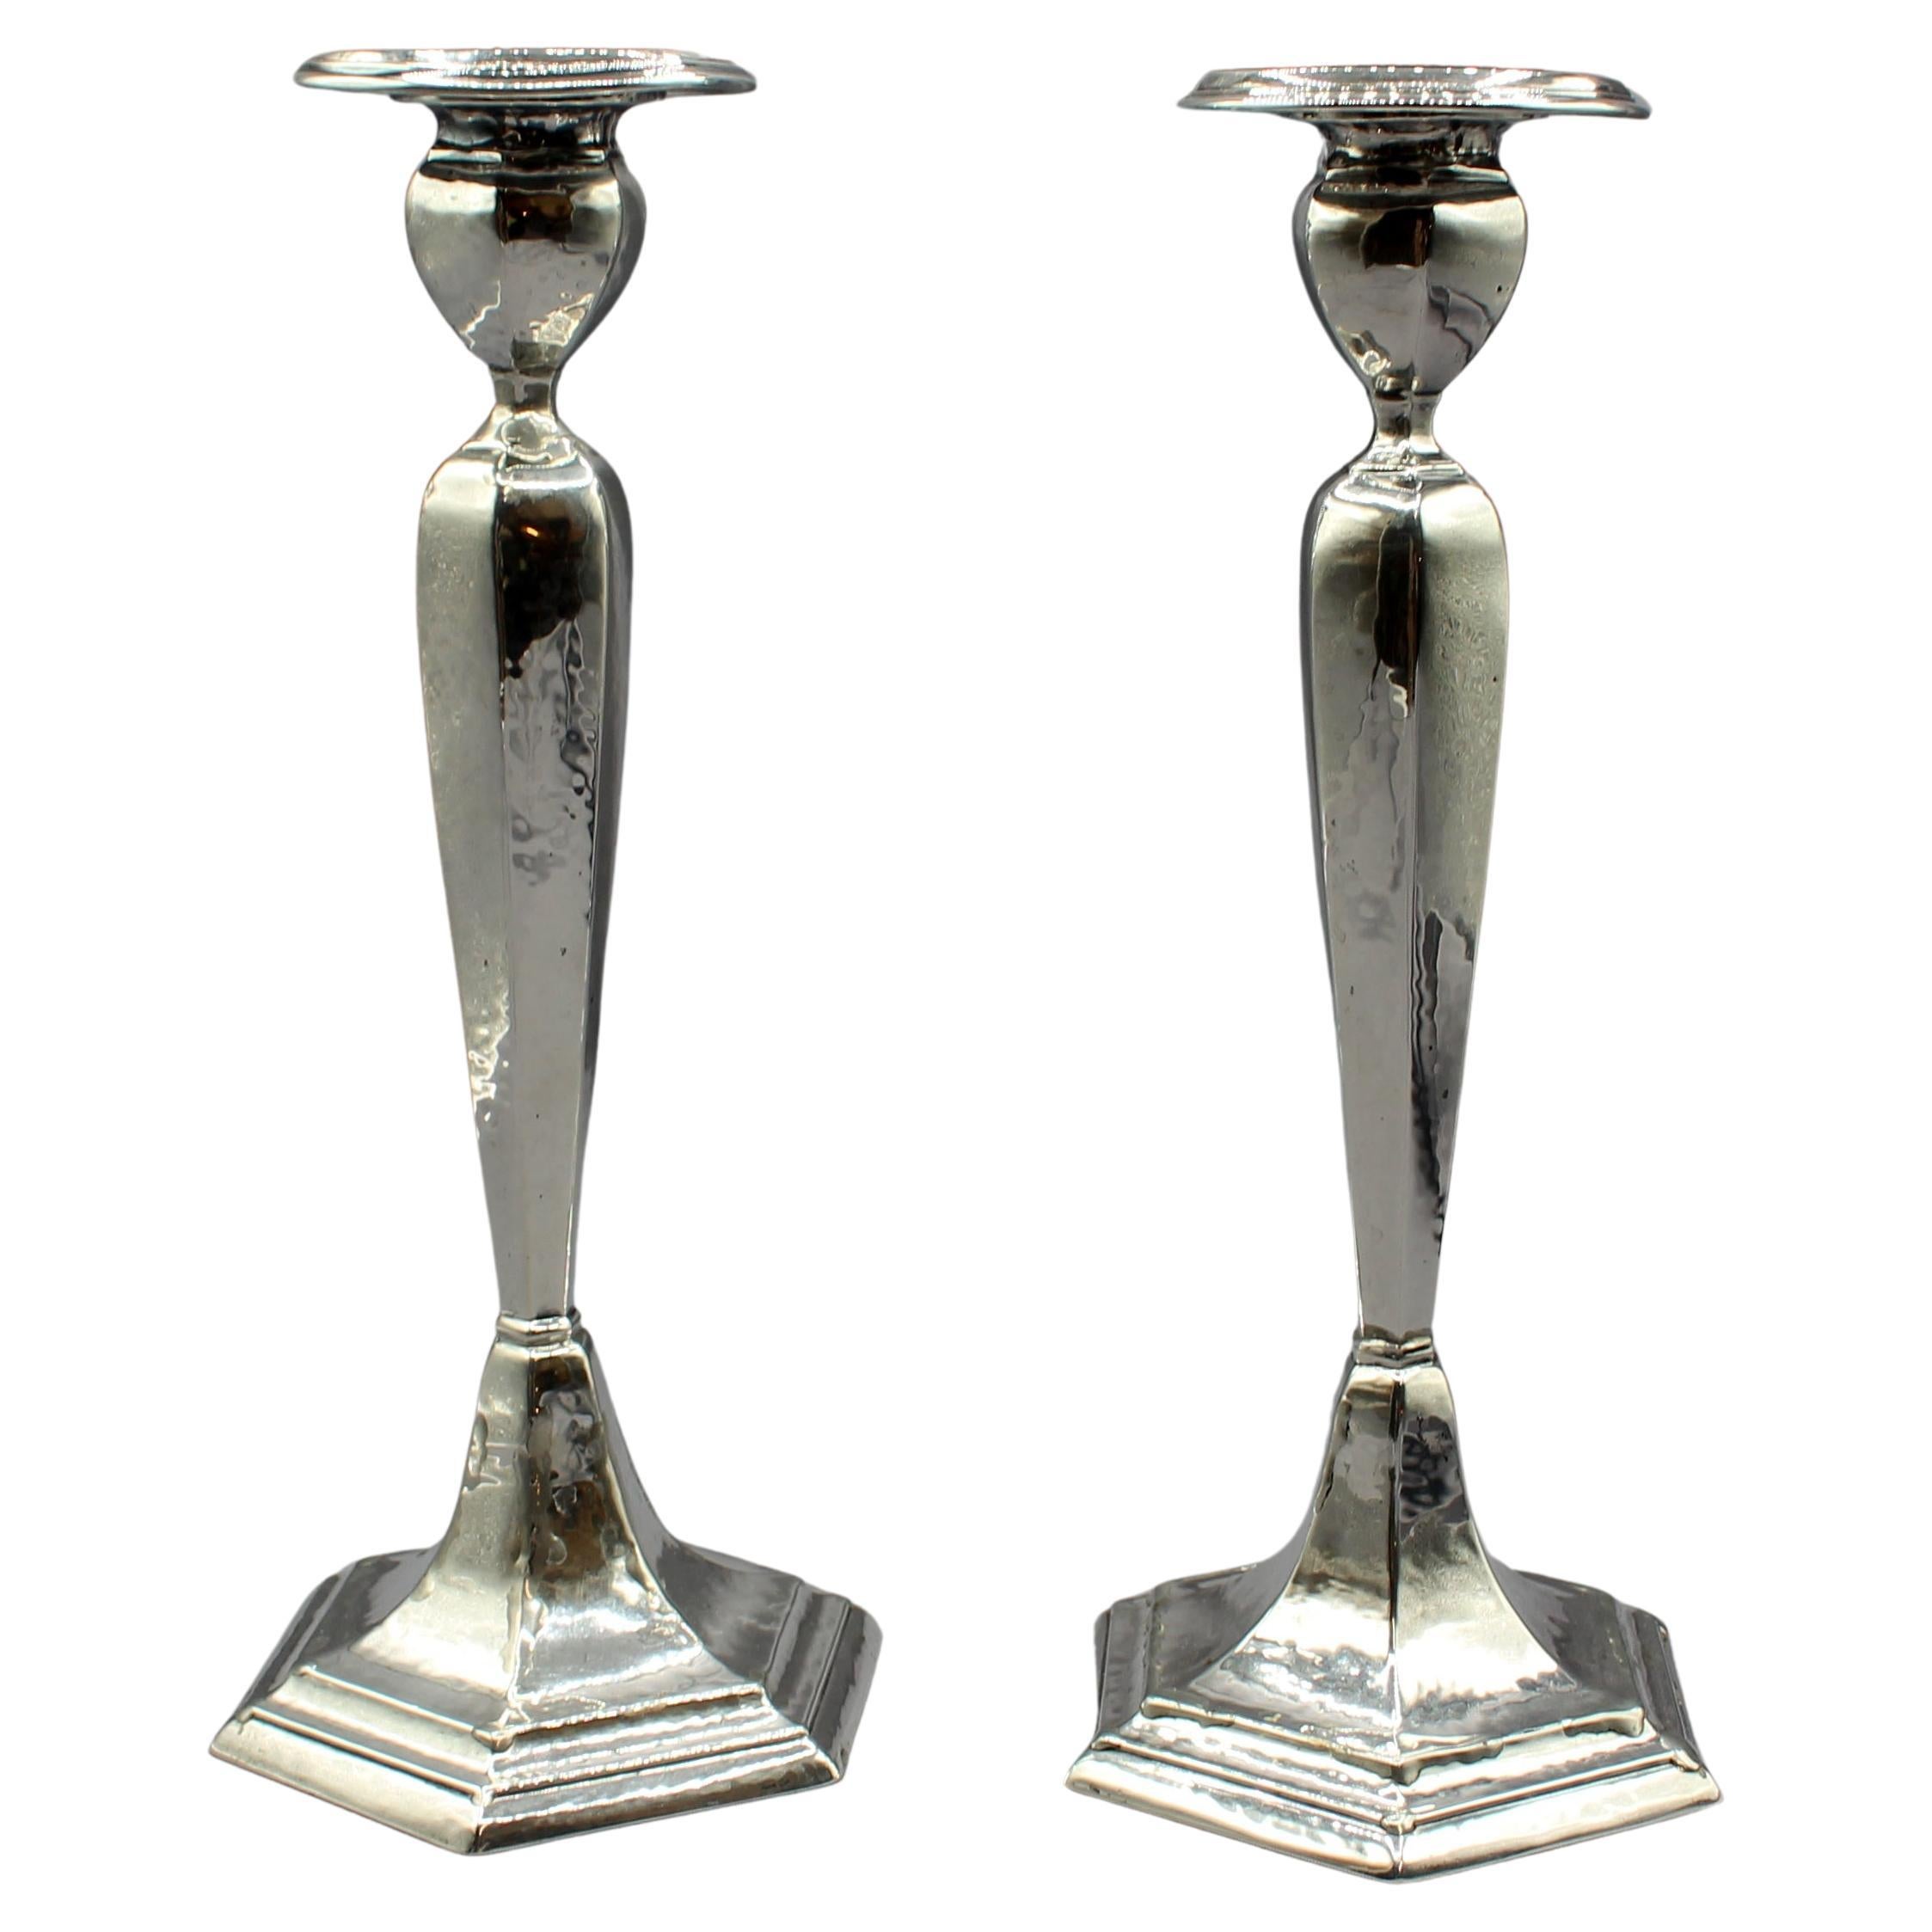 Pair of c. 1920s Sterling Silver Candlesticks by International For Sale